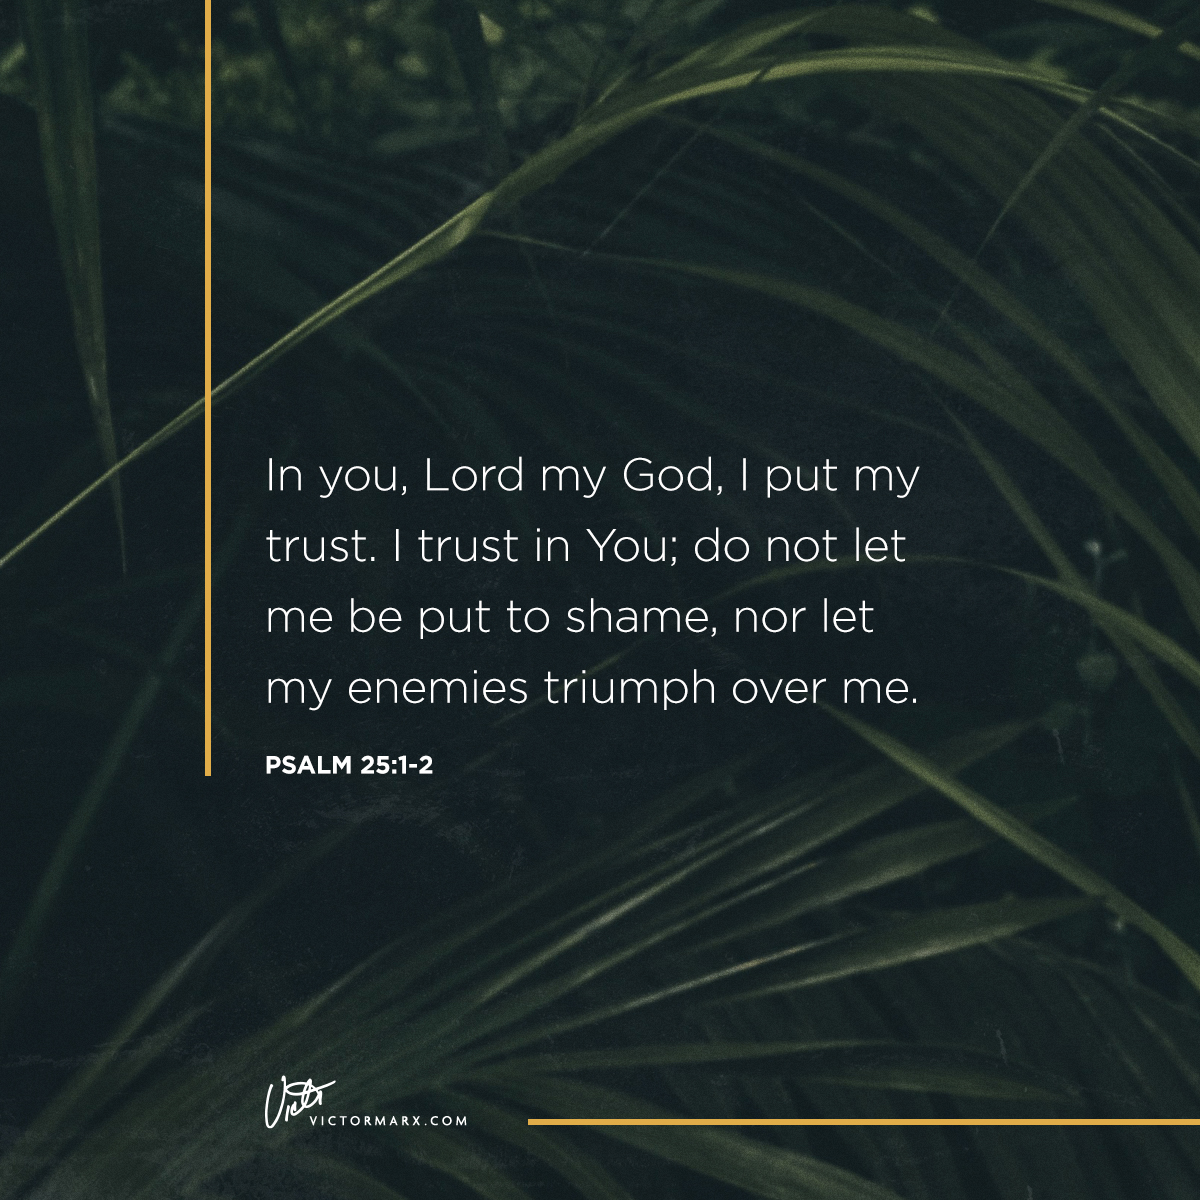 'In you, Lord my God, put my trust. trust in You; do not let me be put to shame, nor let my enemies triumph over me. PSALM 25:1-2 VItTTORMARX.COM Vitr VICTORMARX COM'